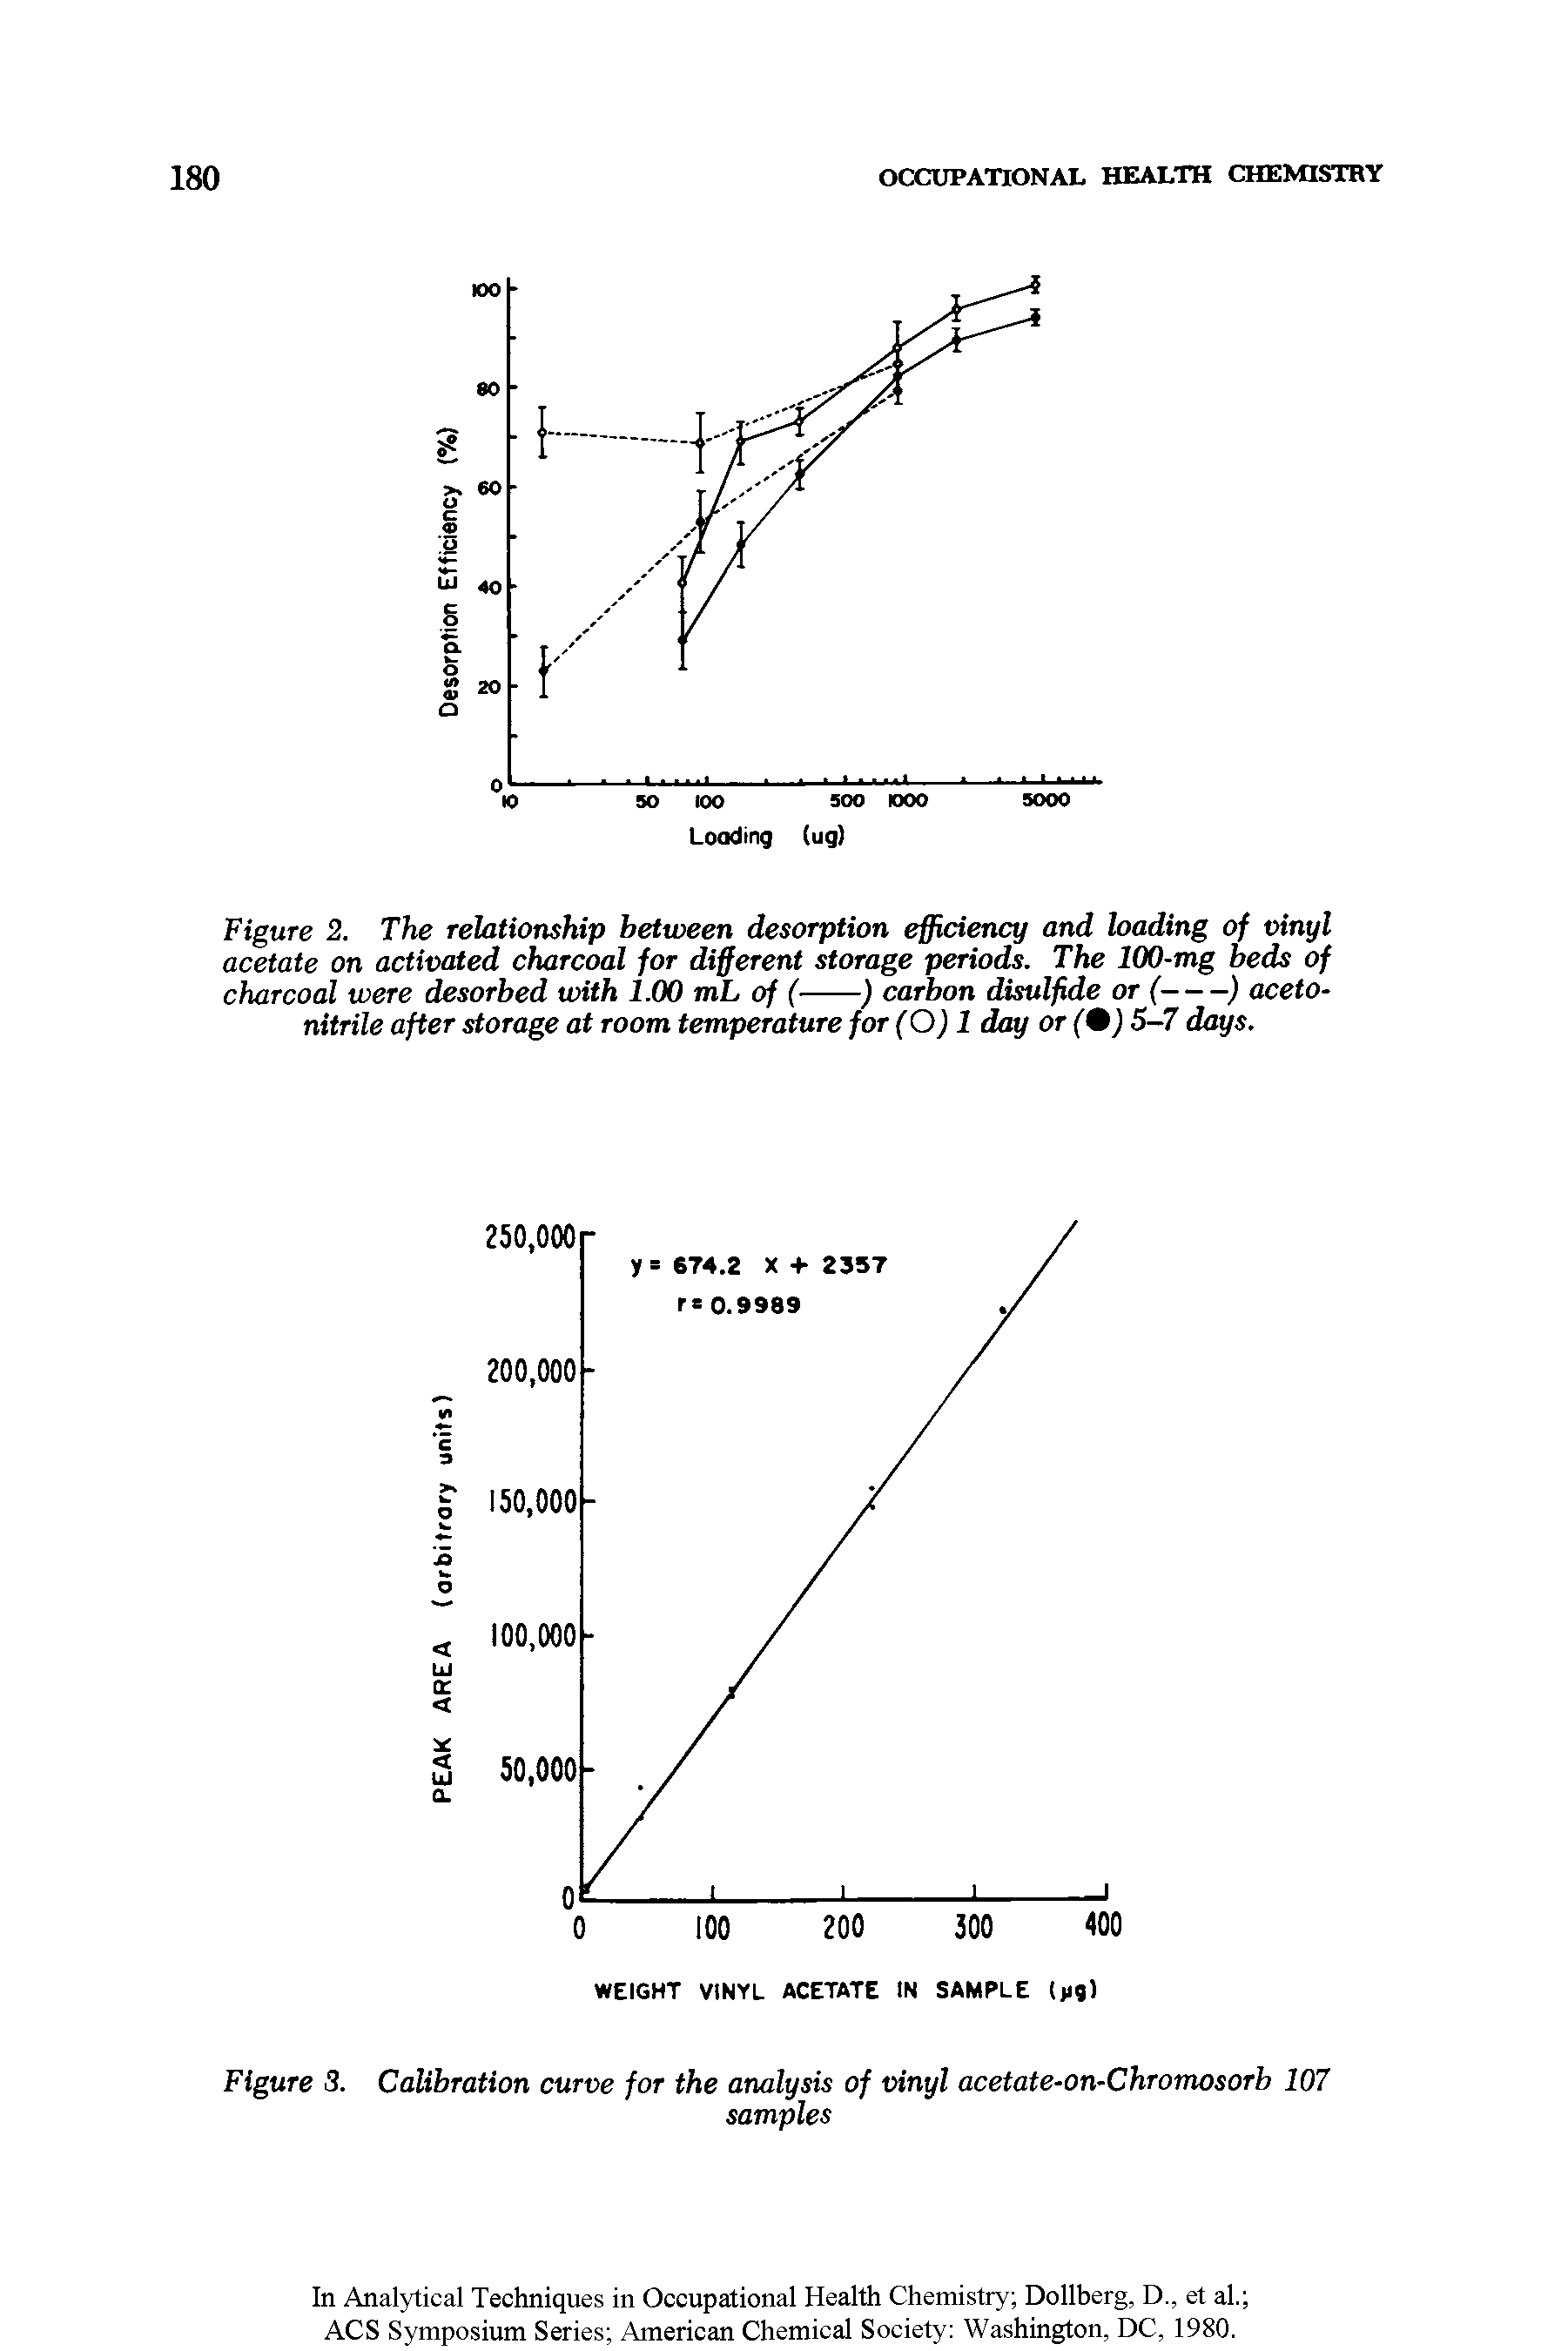 Figure 2. The relationship between desorption efficiency and loading of vinyl acetate on activated charcoal for different storage periods. The 100-mg beds of charcoal were desorbed with 1.00 mL of (------) carbon disulfide or (---) aceto-...